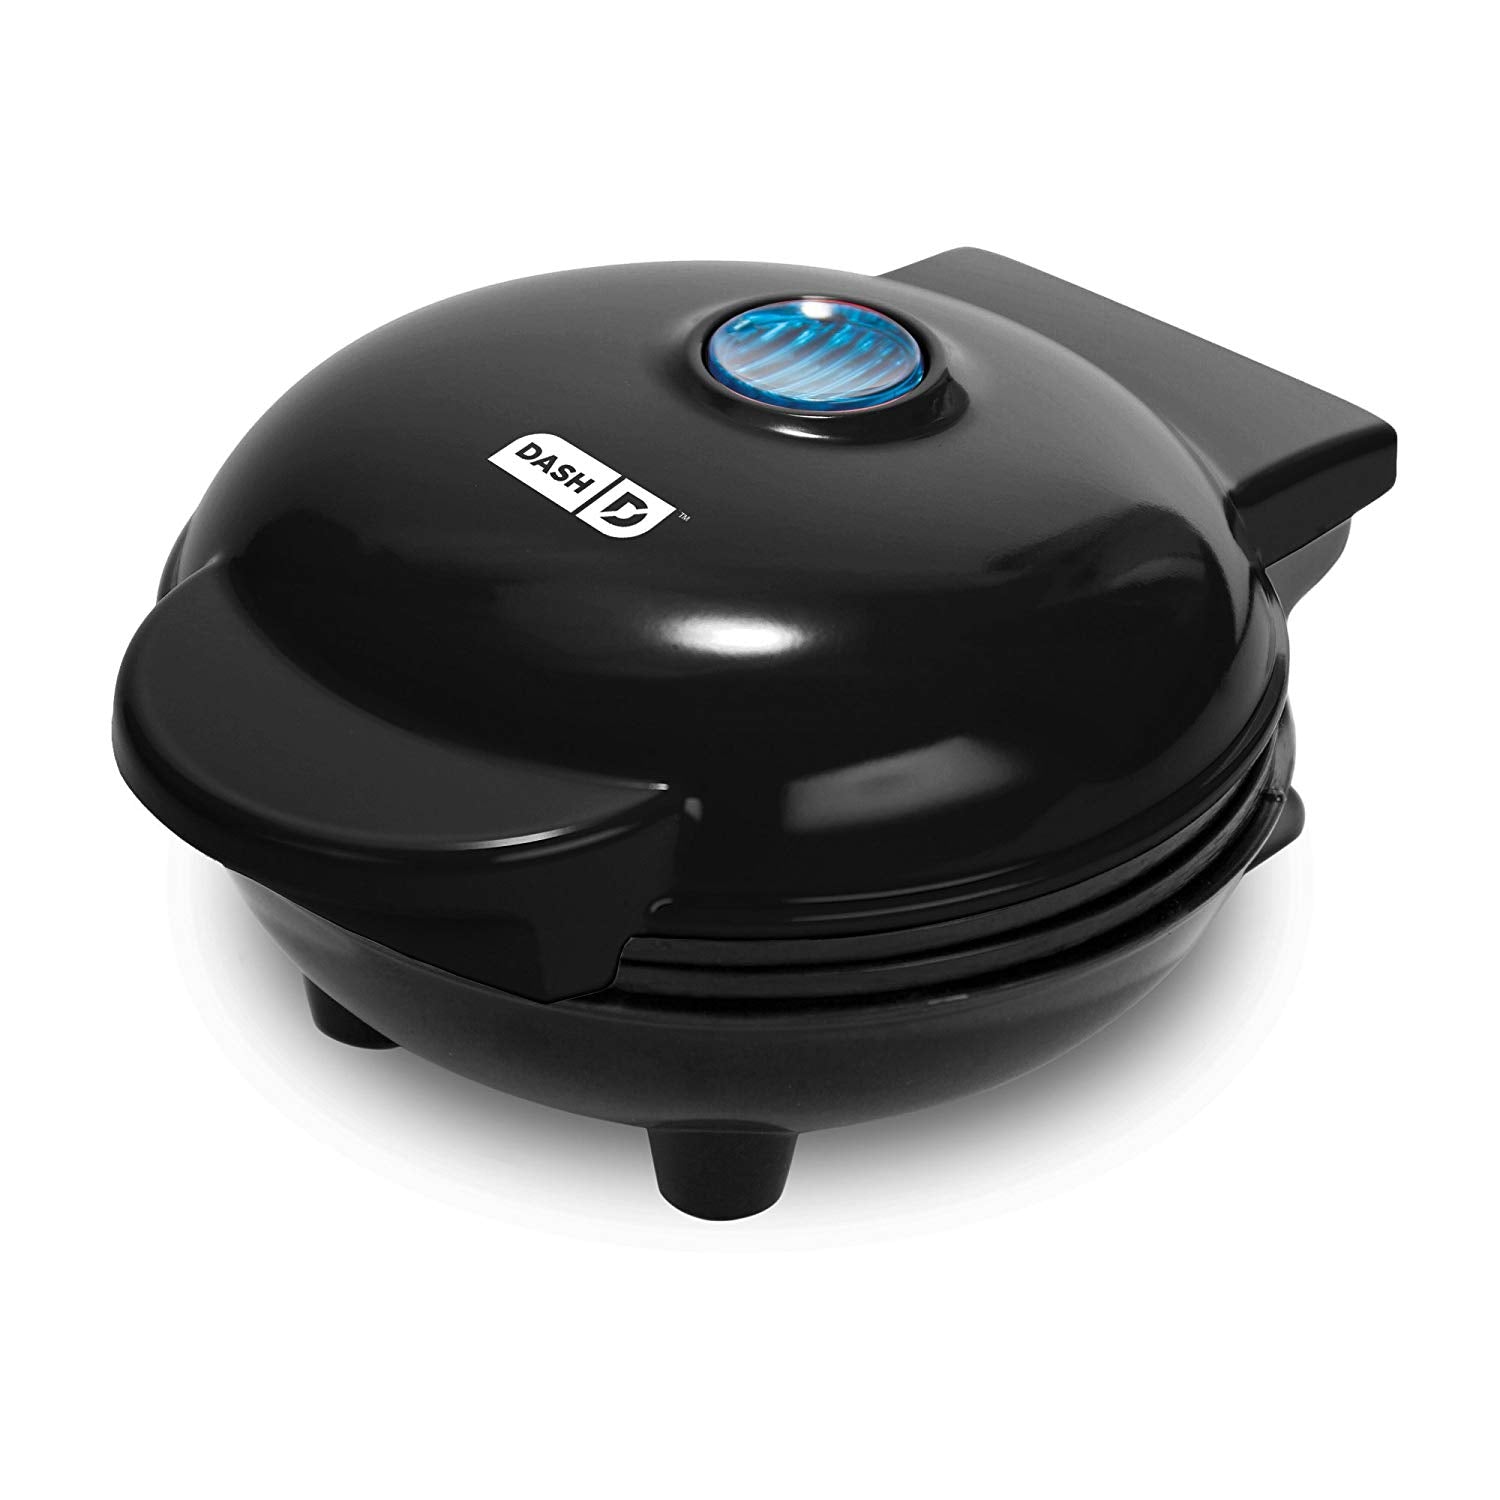 Dash Waffle Maker on sale today!